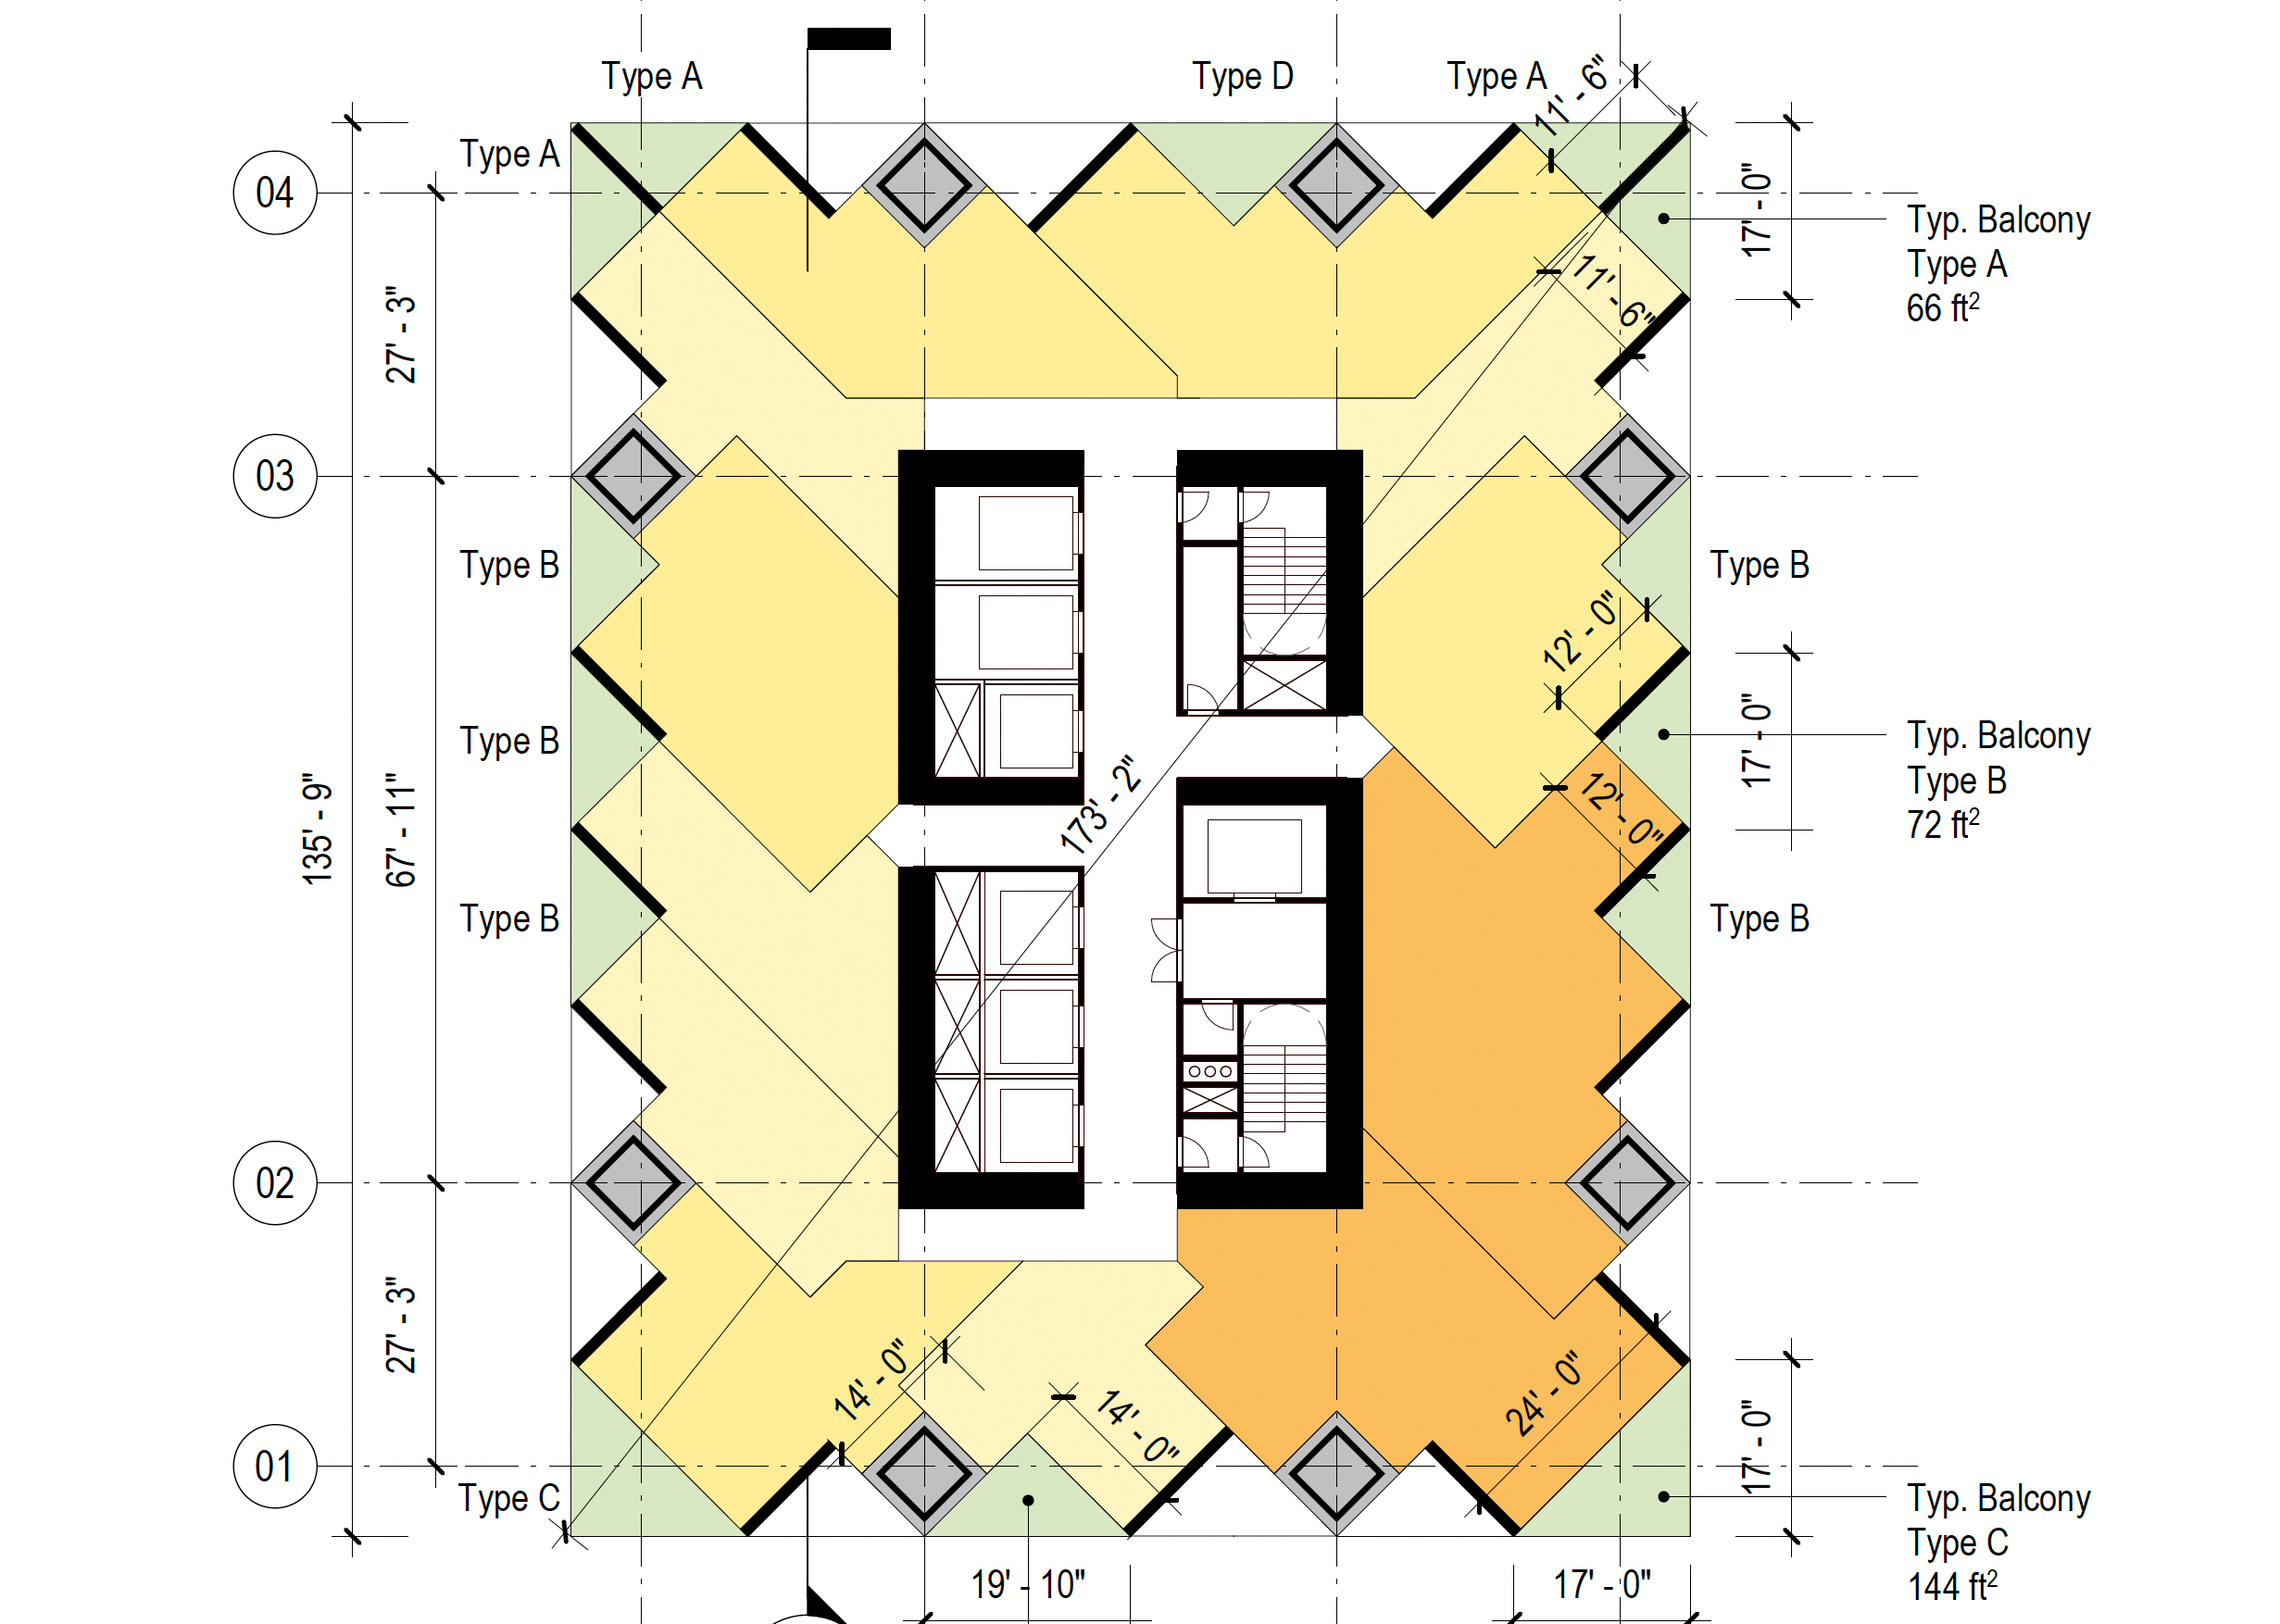 50 Main Street typical floor plan between levels 9-31, illustration by Foster and Partners